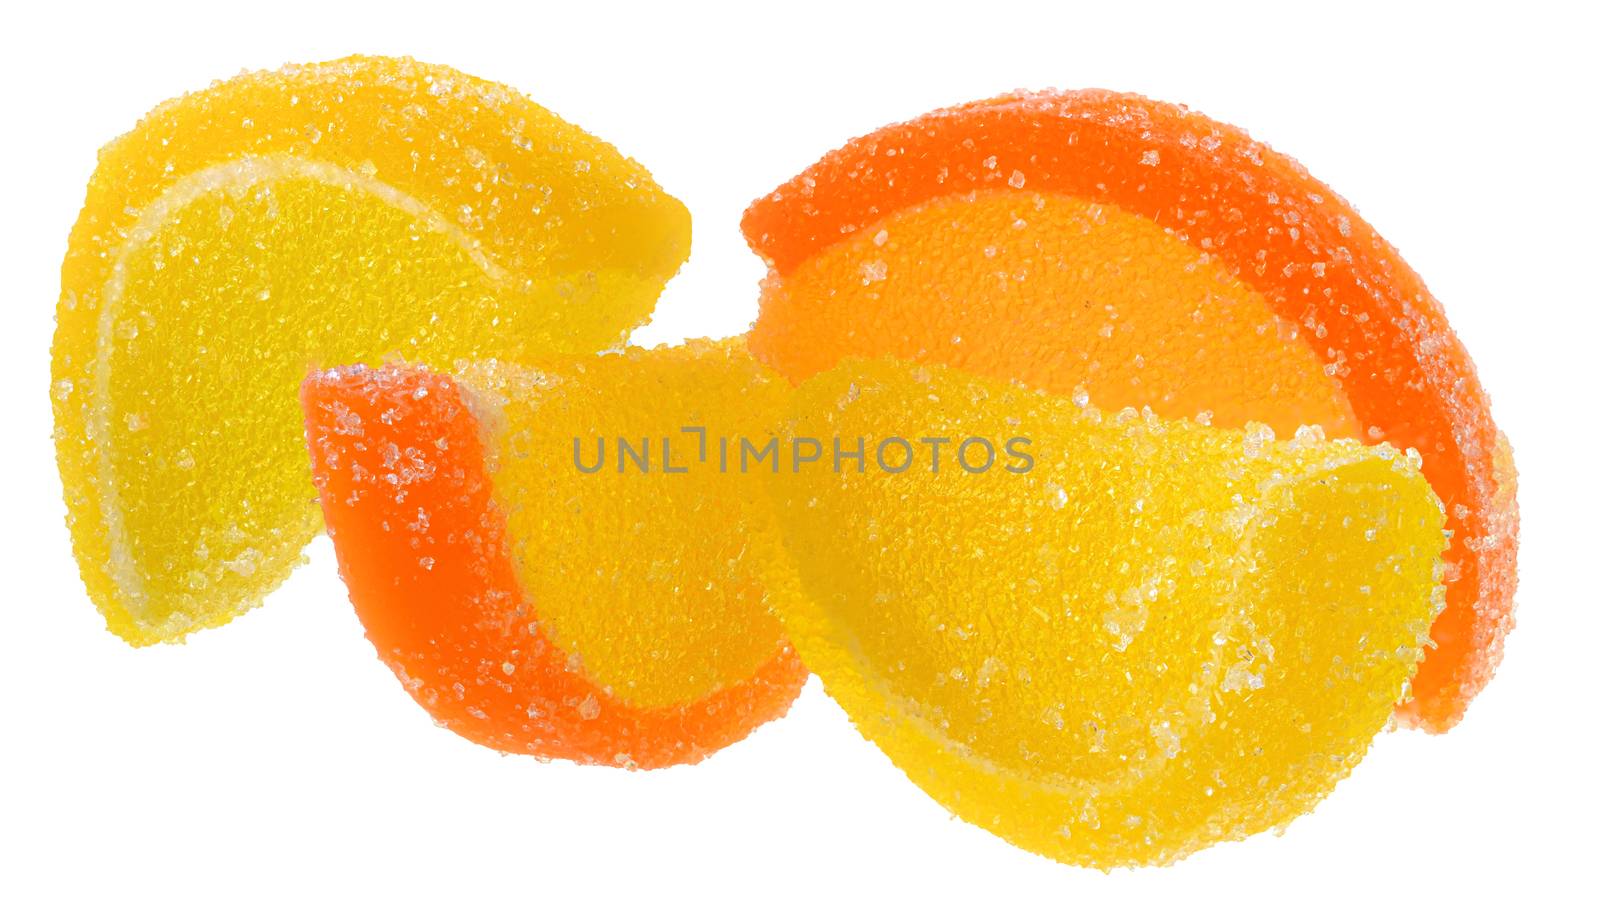 Red and yellow candy on a white background.